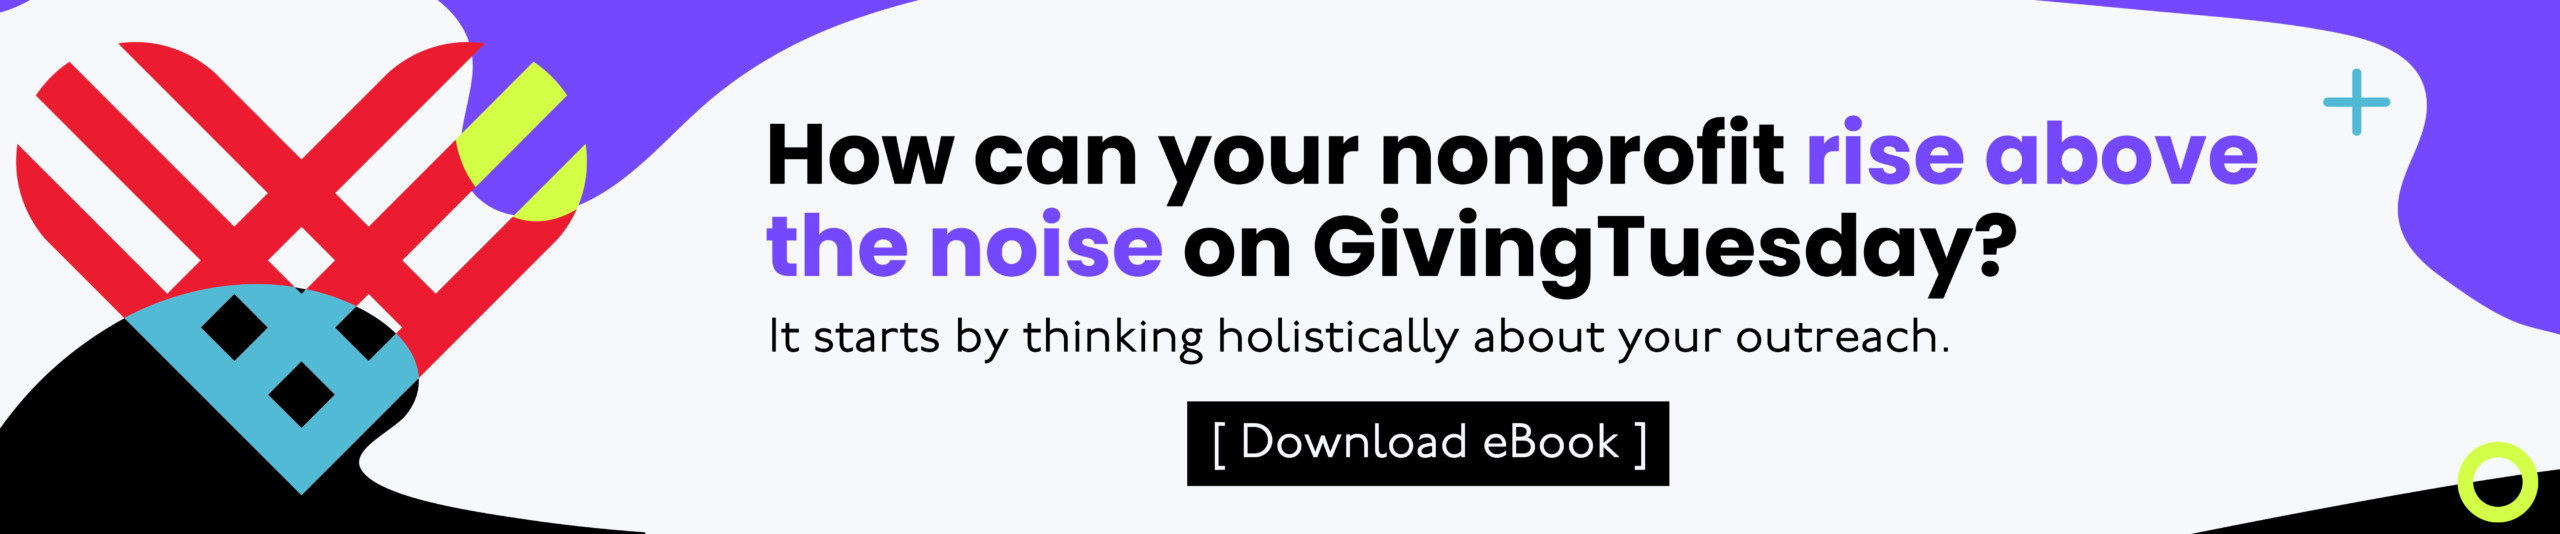 FREE eBOOK: GivingTuesday - Your nonprofit's holistic approach.